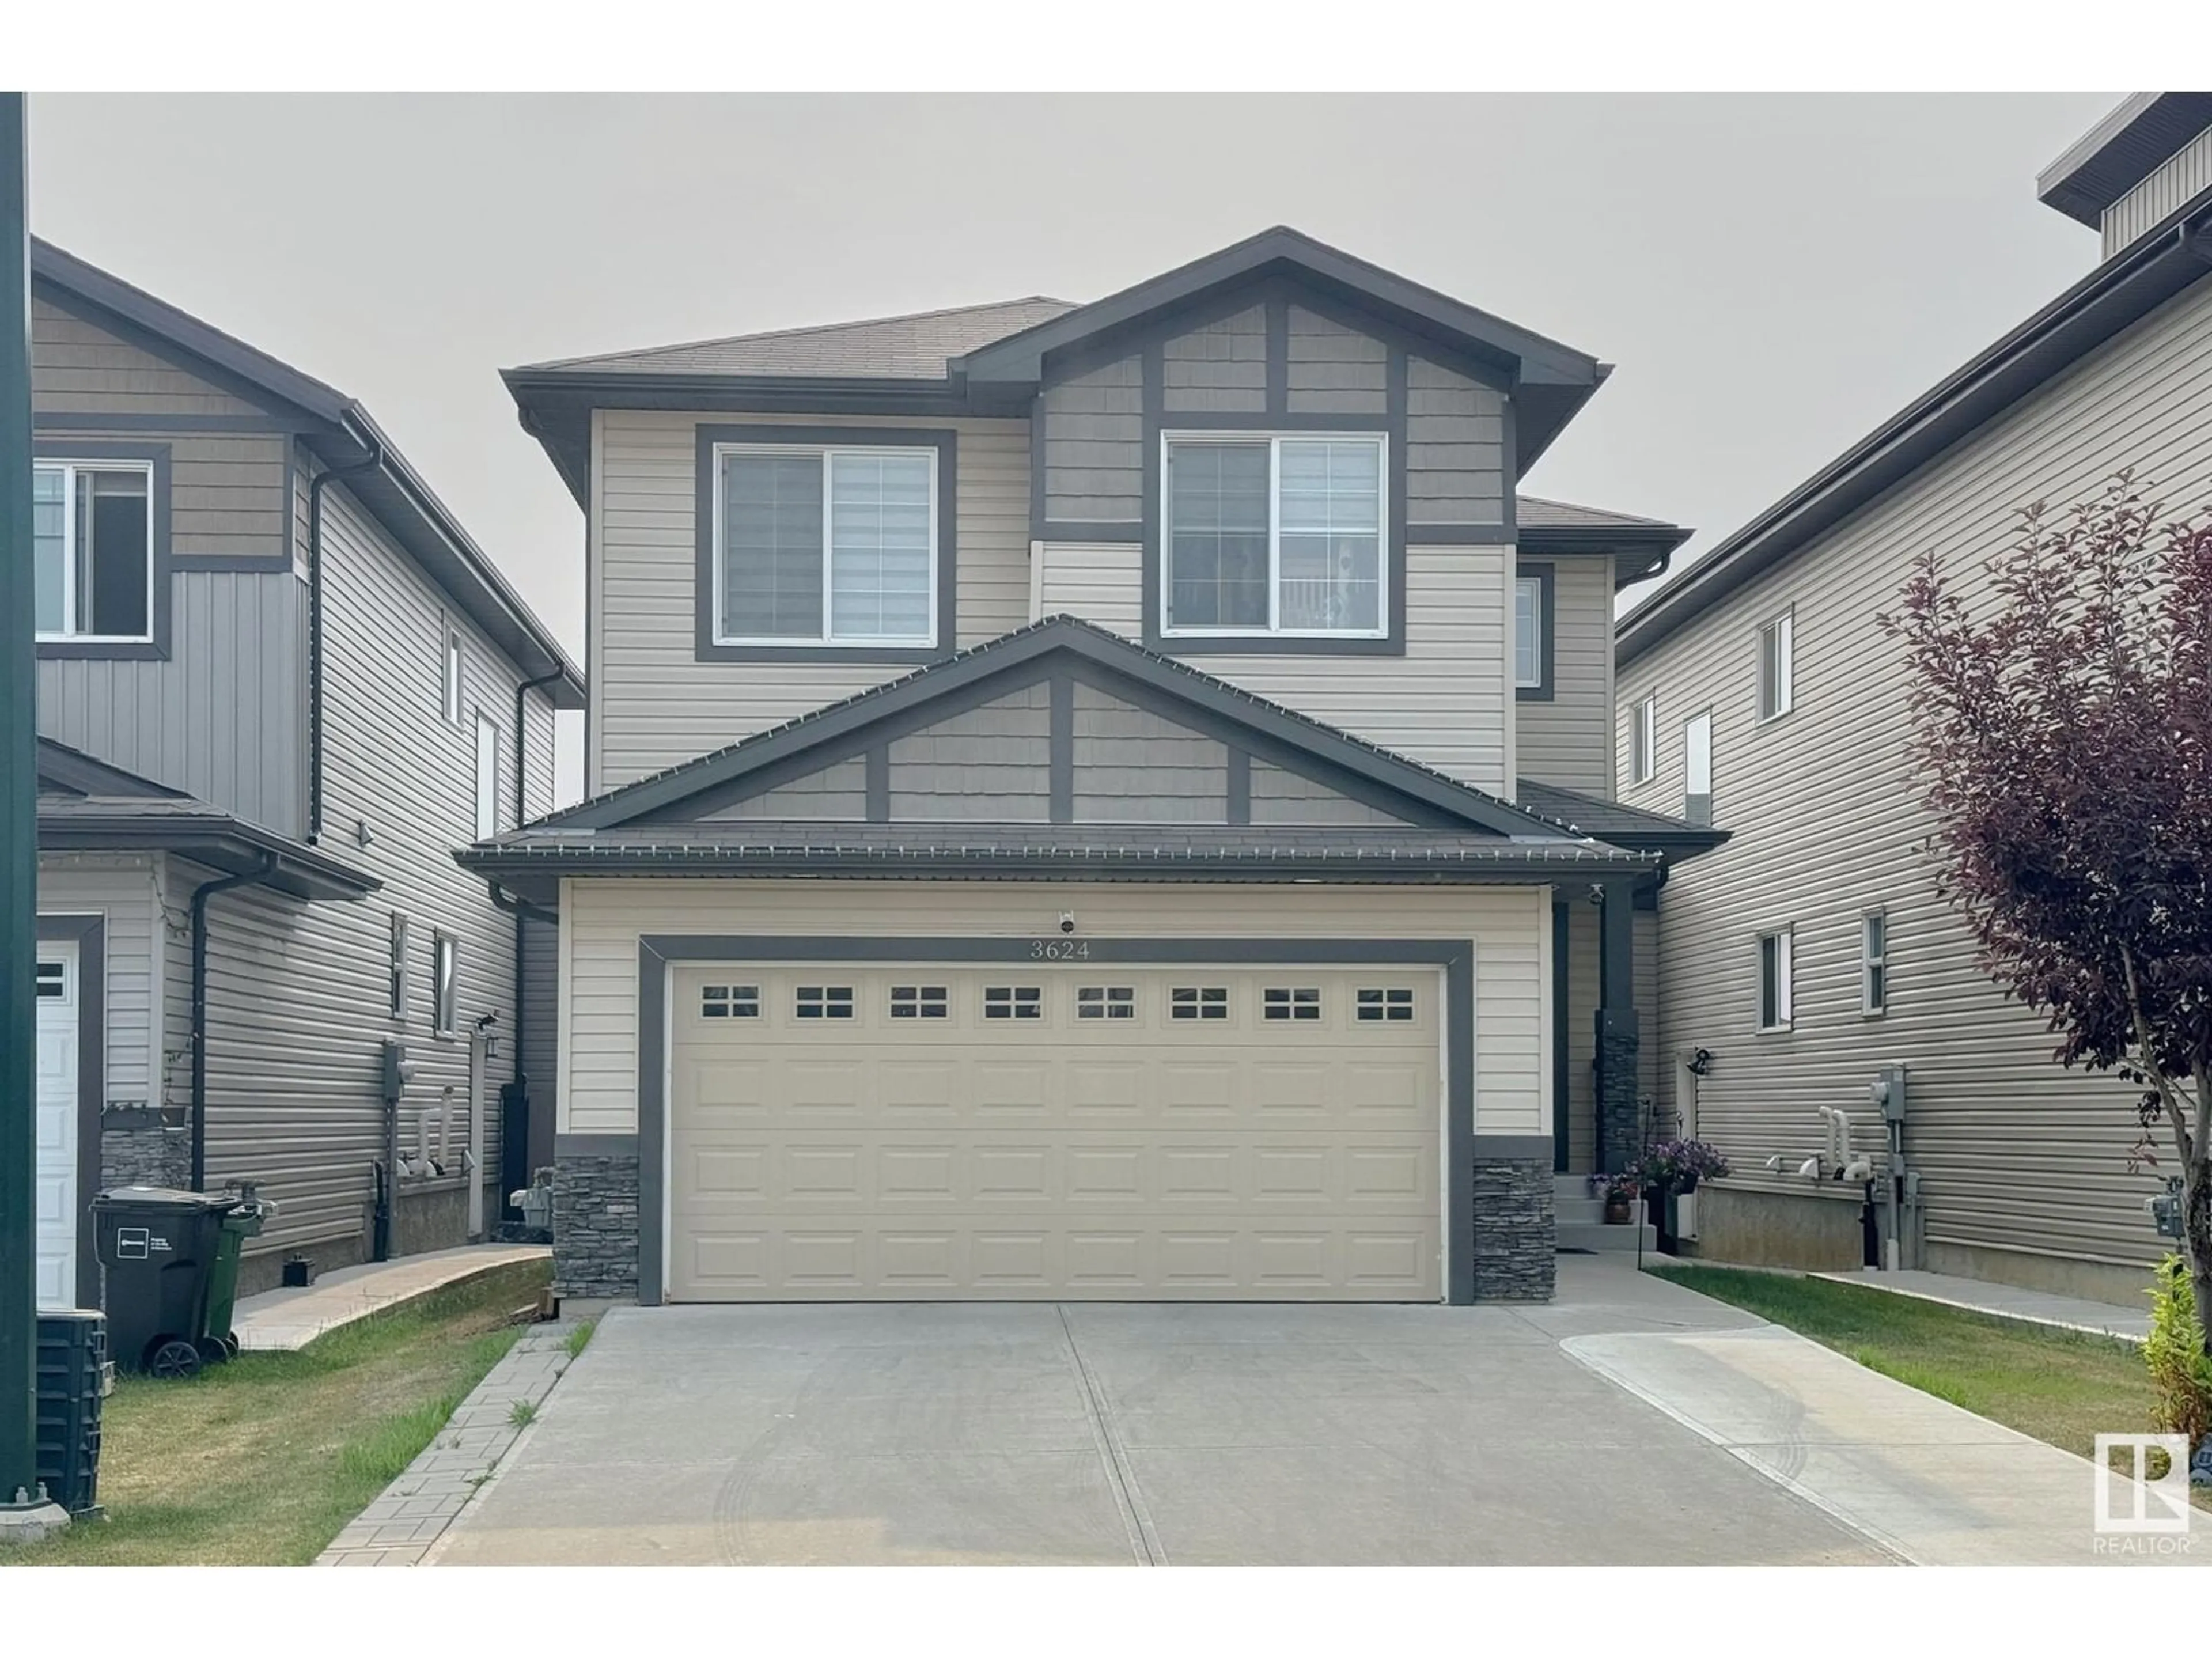 Frontside or backside of a home for 3624 8 street NW, Edmonton Alberta T6T1A1